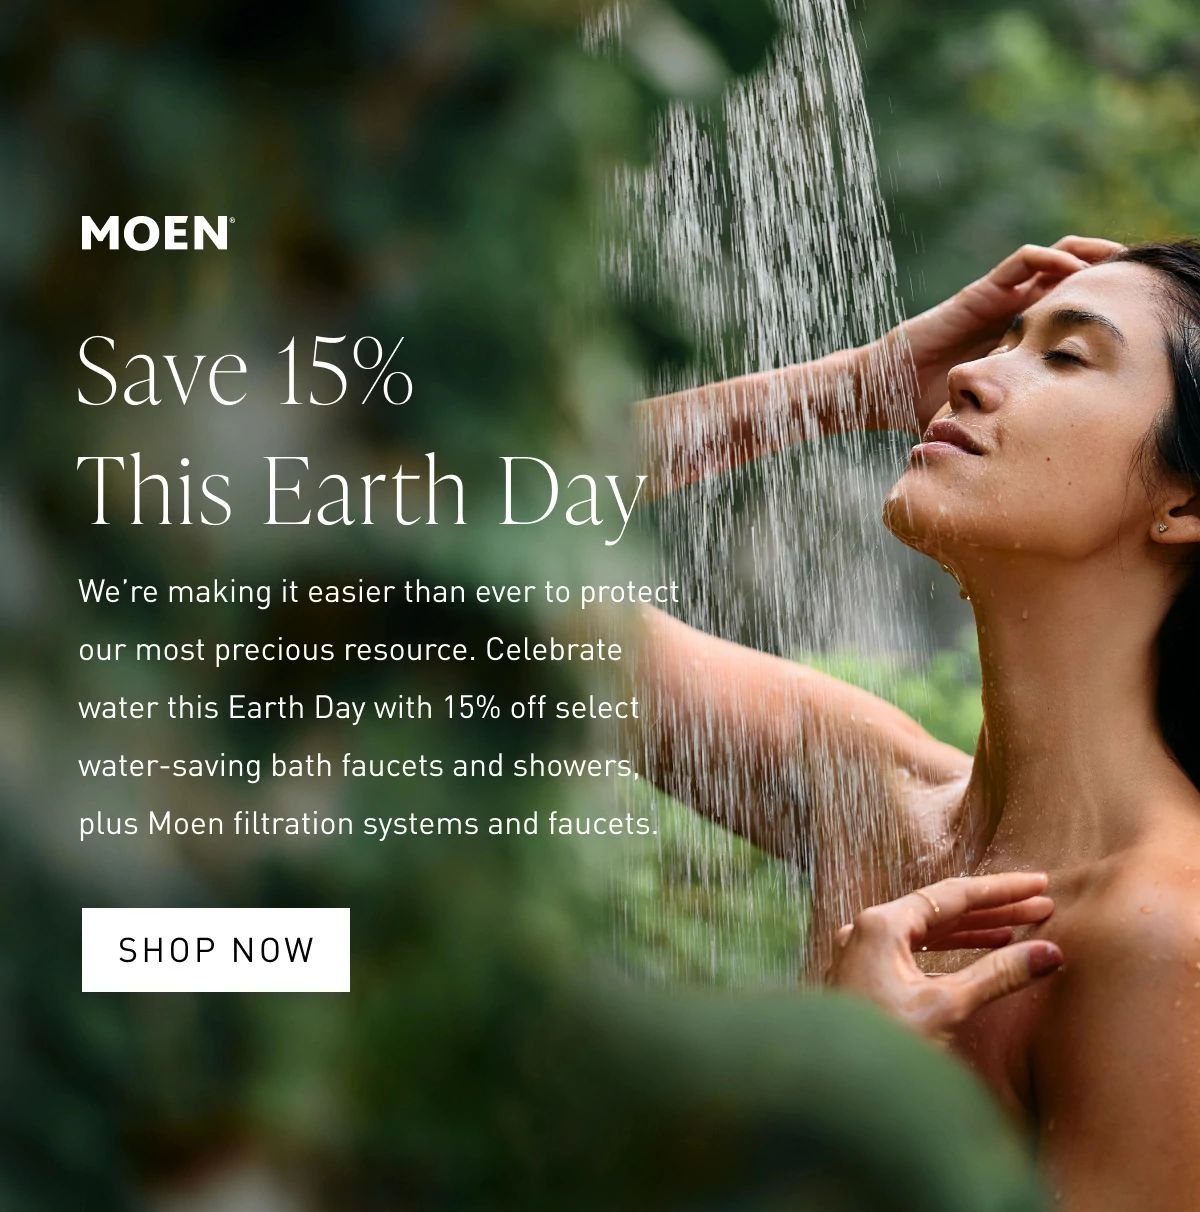 Save 15% This Earth Day | We’re making it easier than ever to protect our most precious resource. Celebrate water this Earth Day with 15% off select water-saving bath faucets and showers, plus Moen filtration systems and faucets. Shop Now >